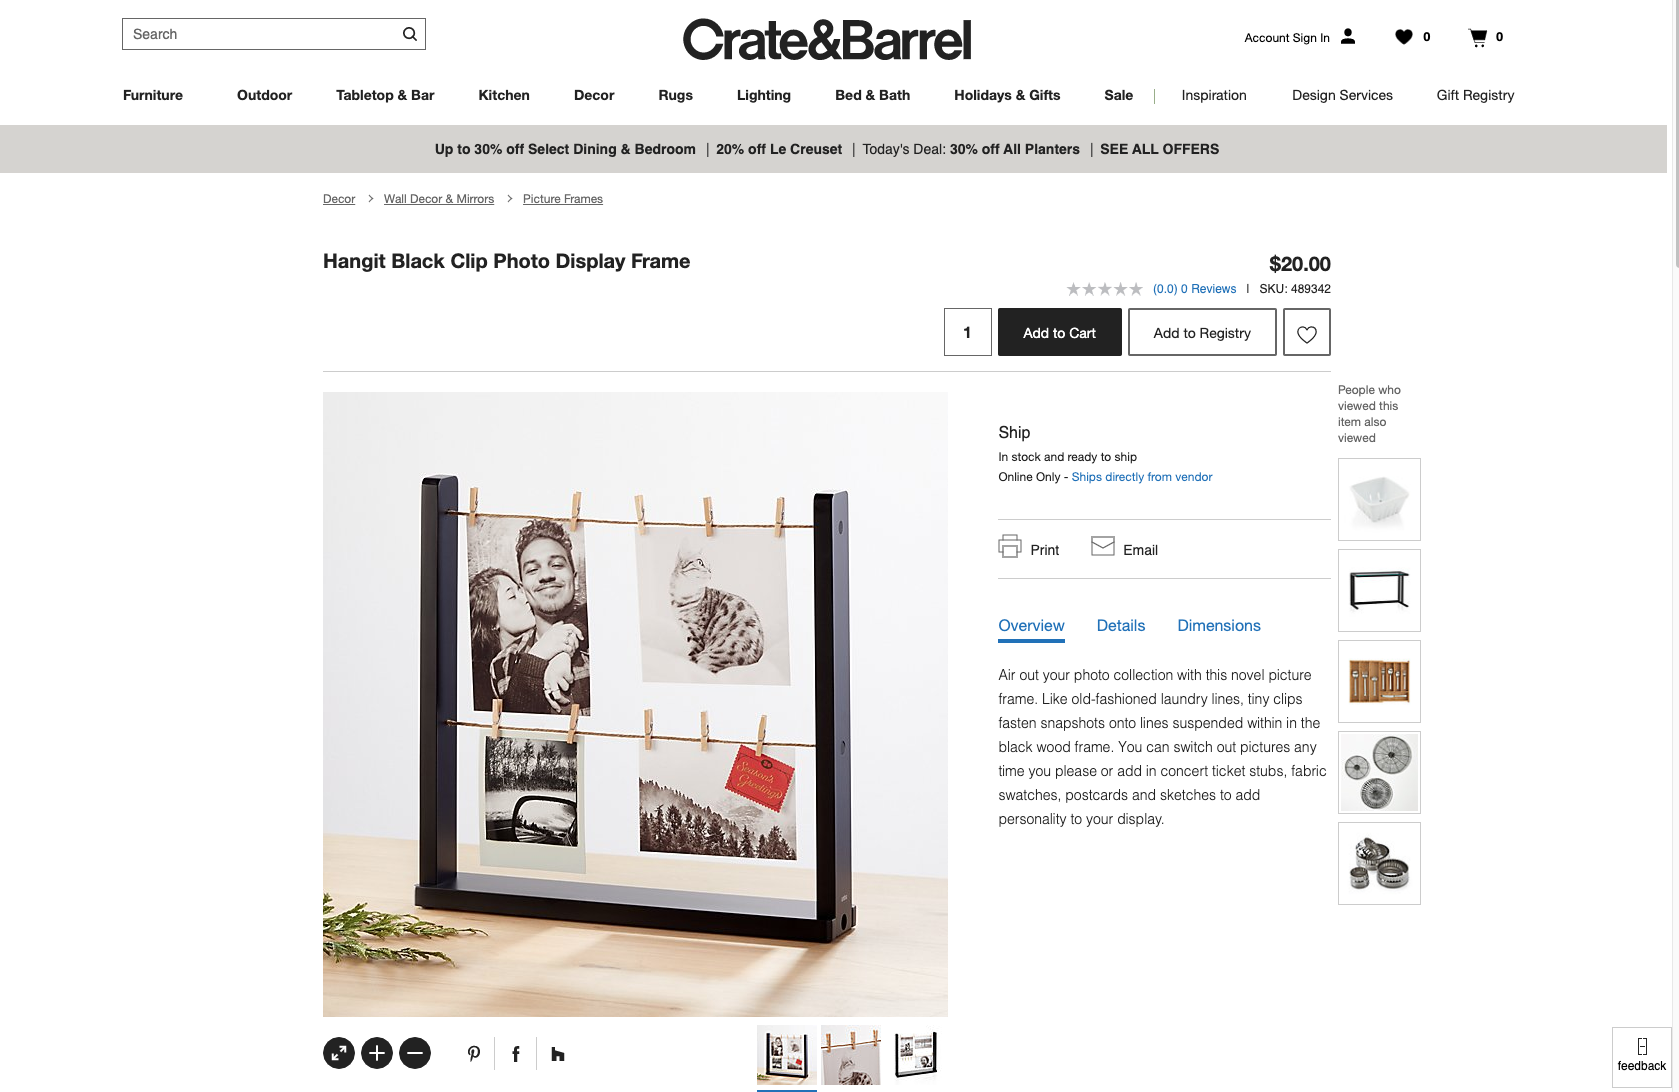 CRATE AND BARREL VS THRIFT STORE  DIY CRATE AND BARREL DUPES ON A